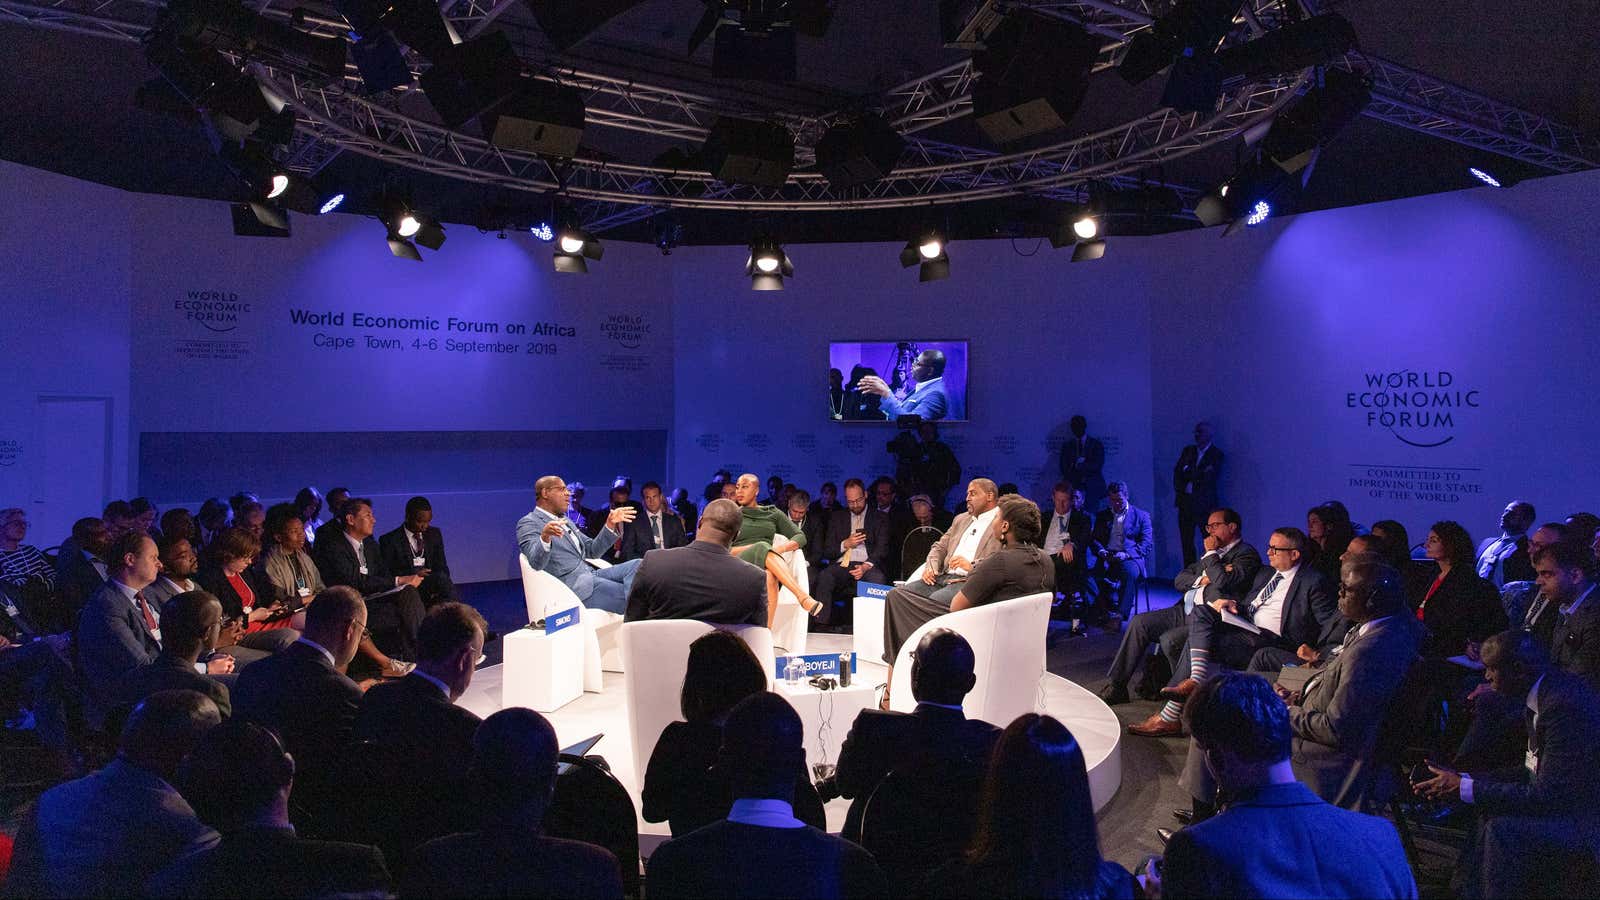 Iyin Aboyeji at Quartz Africa panel at the World Economic Forum in Cape Town, South Africa